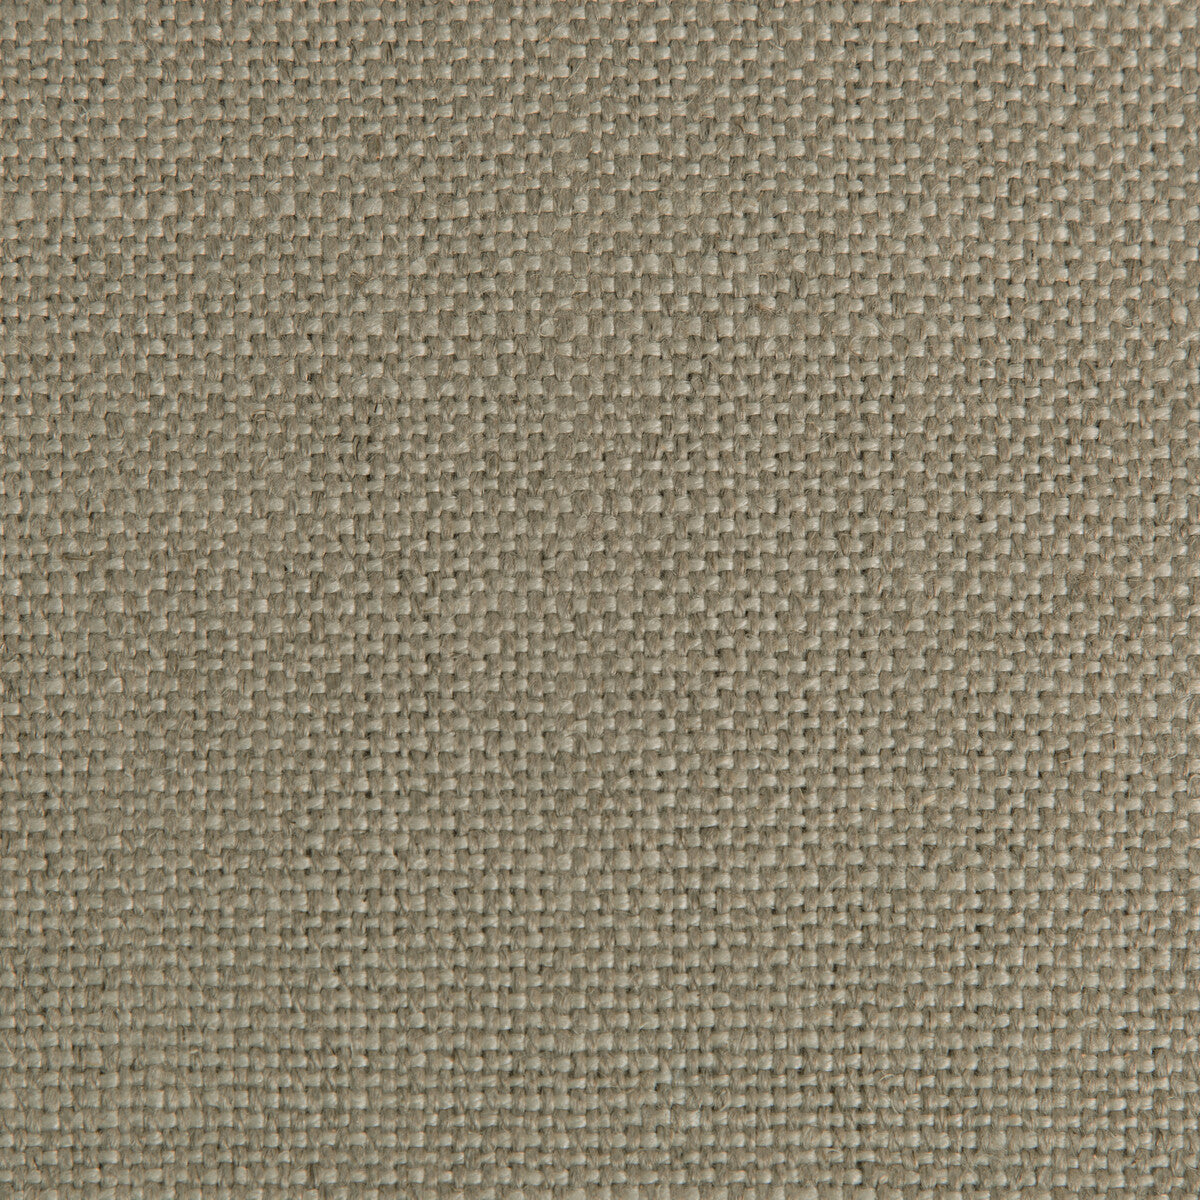 Stone Harbor fabric in flax color - pattern 27591.1616.0 - by Kravet Basics in the The Complete Linen IV collection